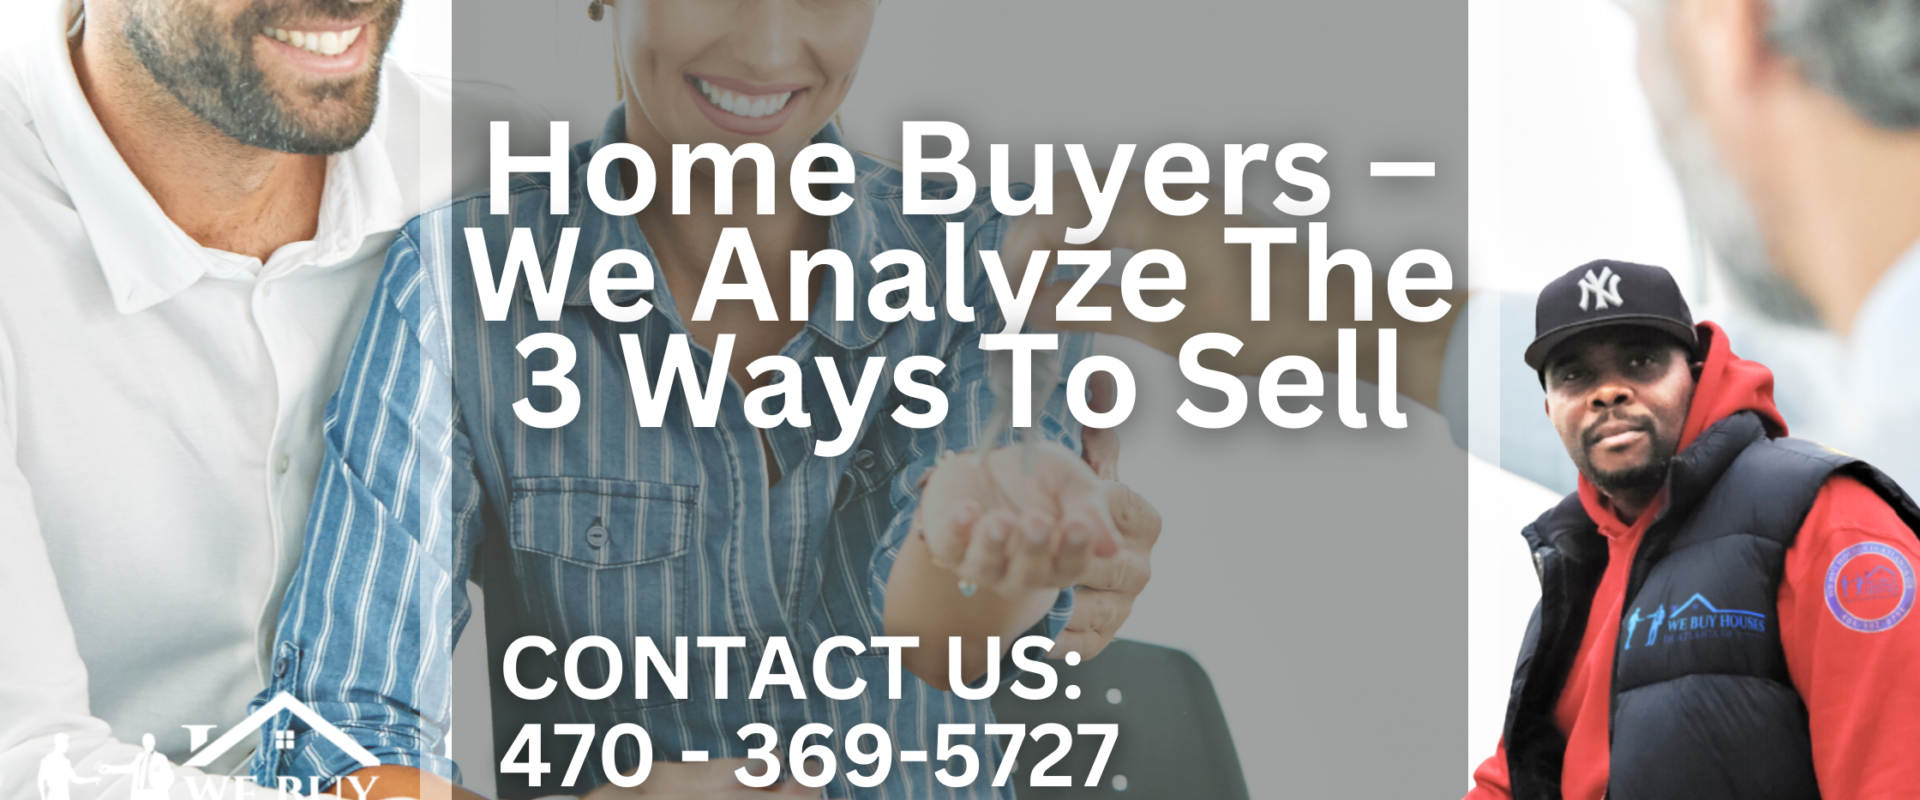 Home Buyers – We Analyze The 3 Ways To Sell